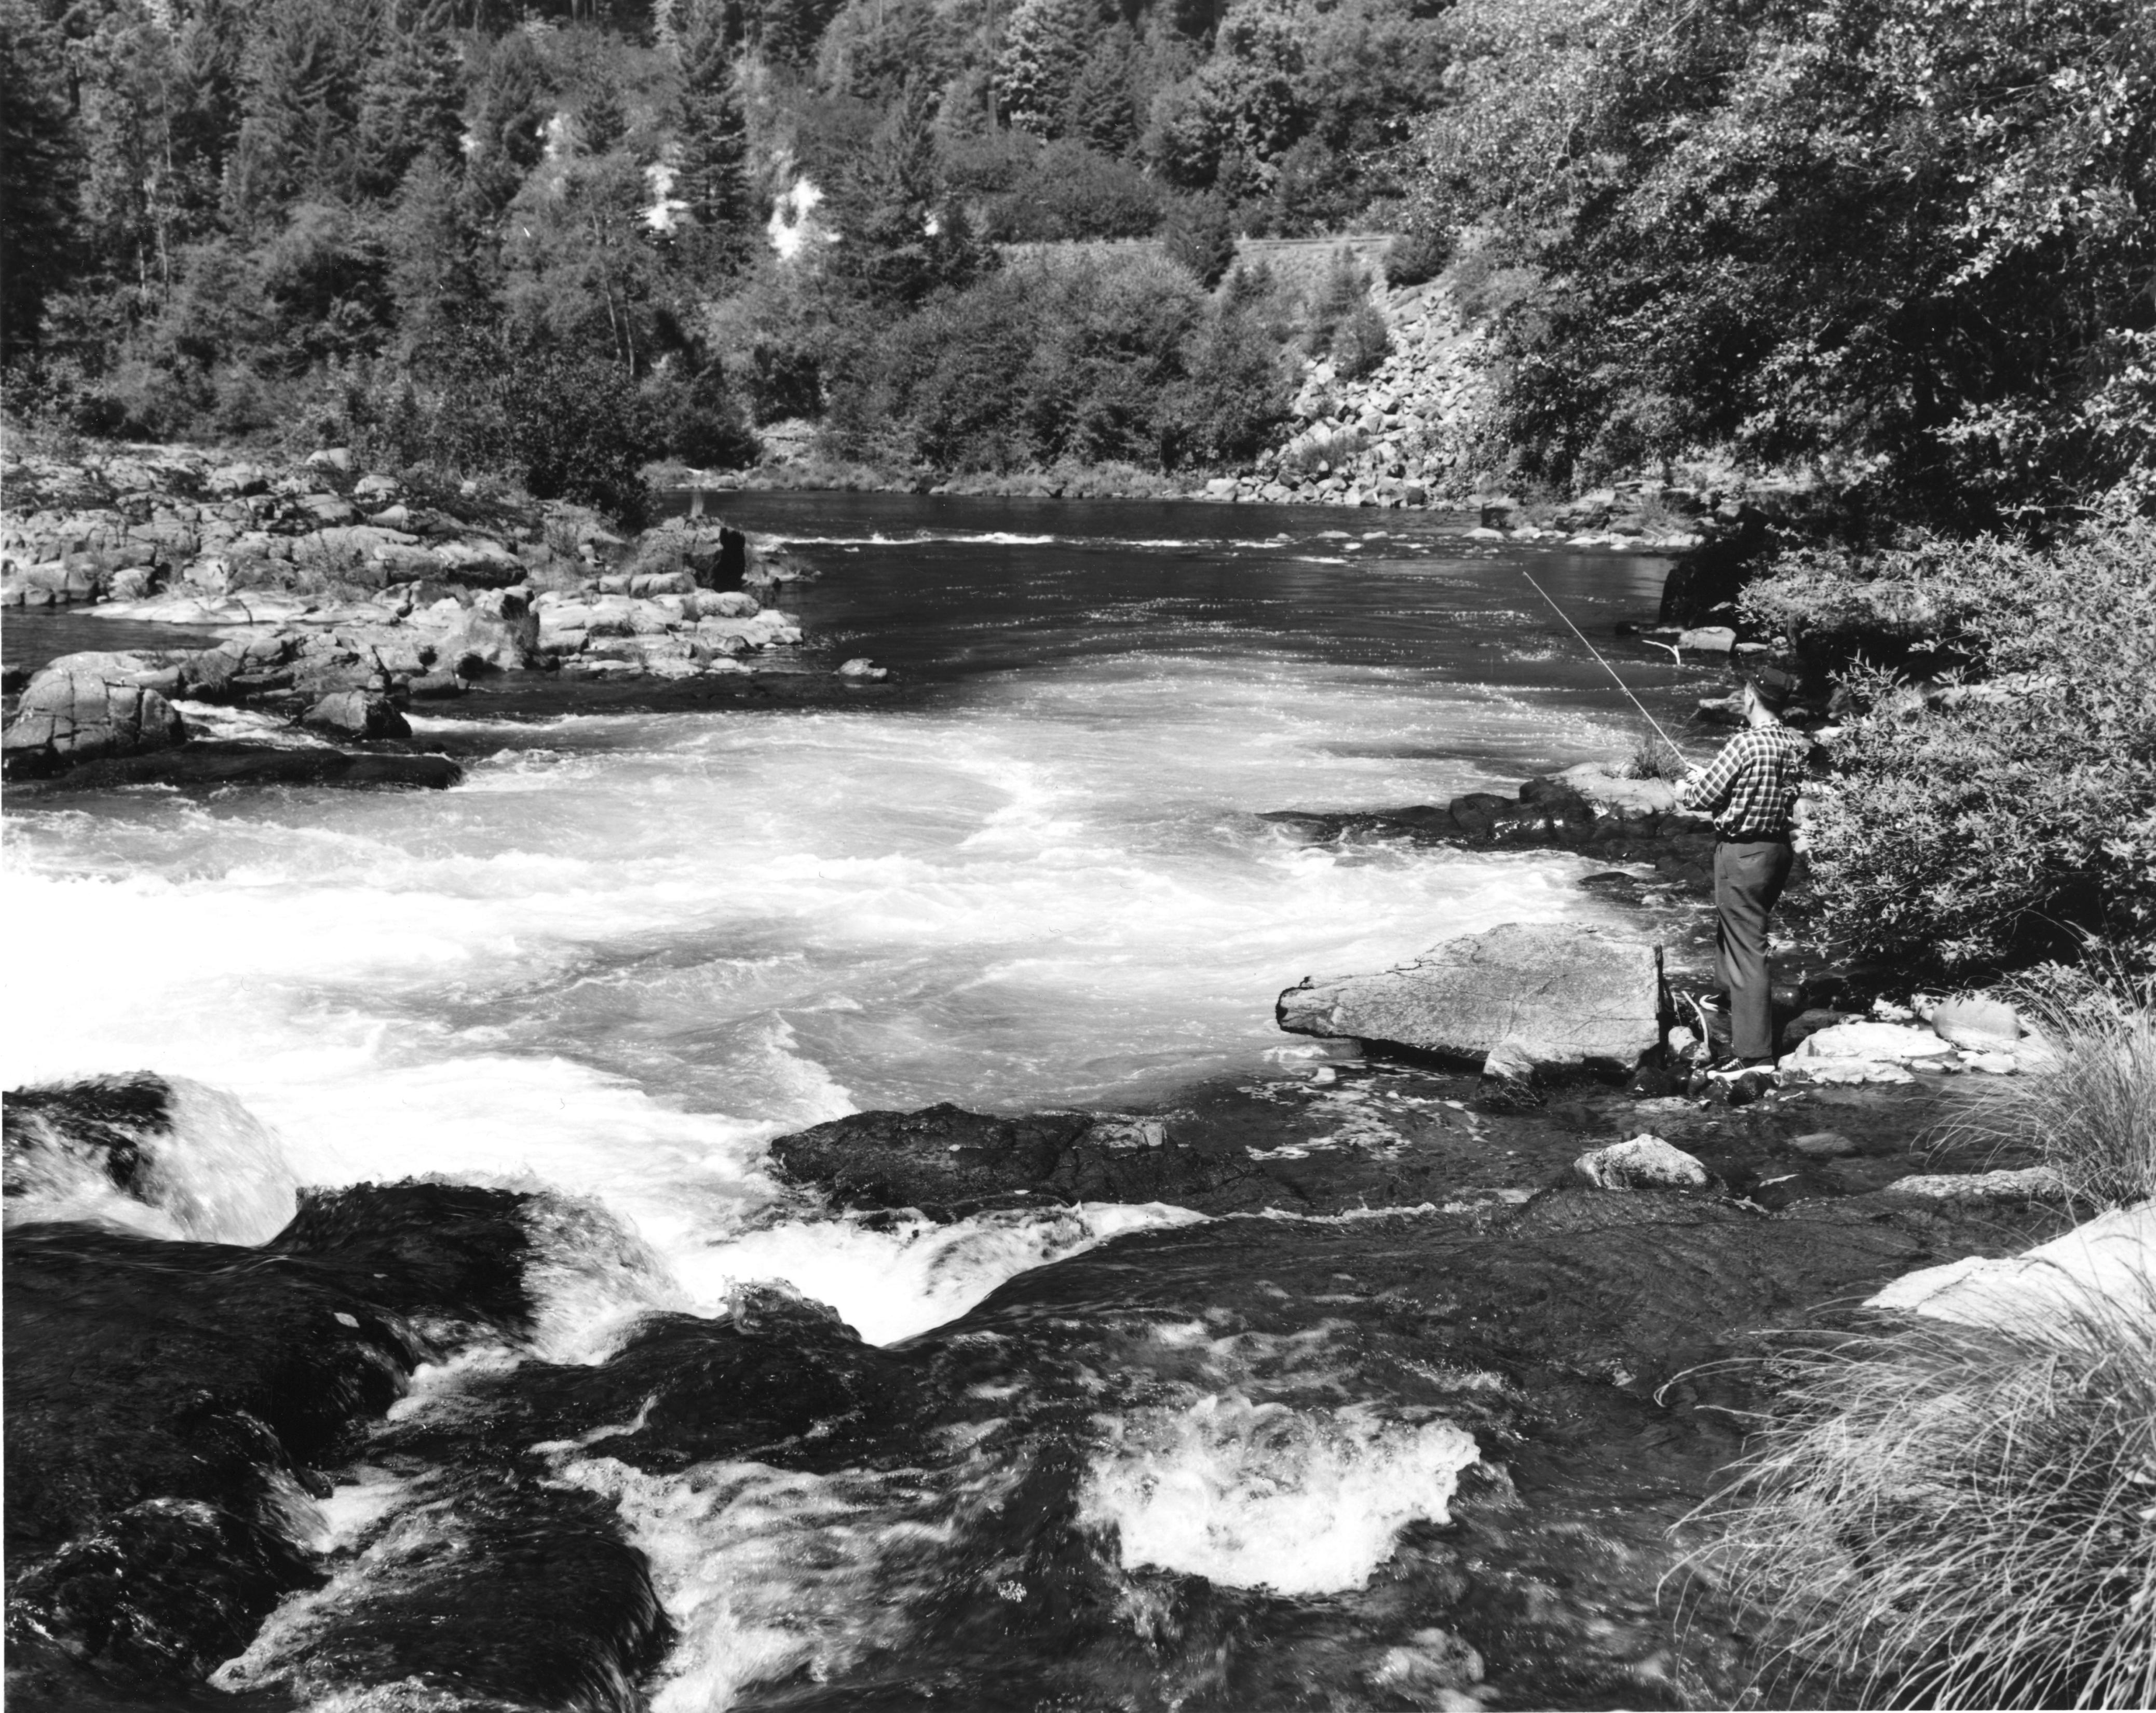 White water fishing in the North Umpqua River in the Cascade Mountains